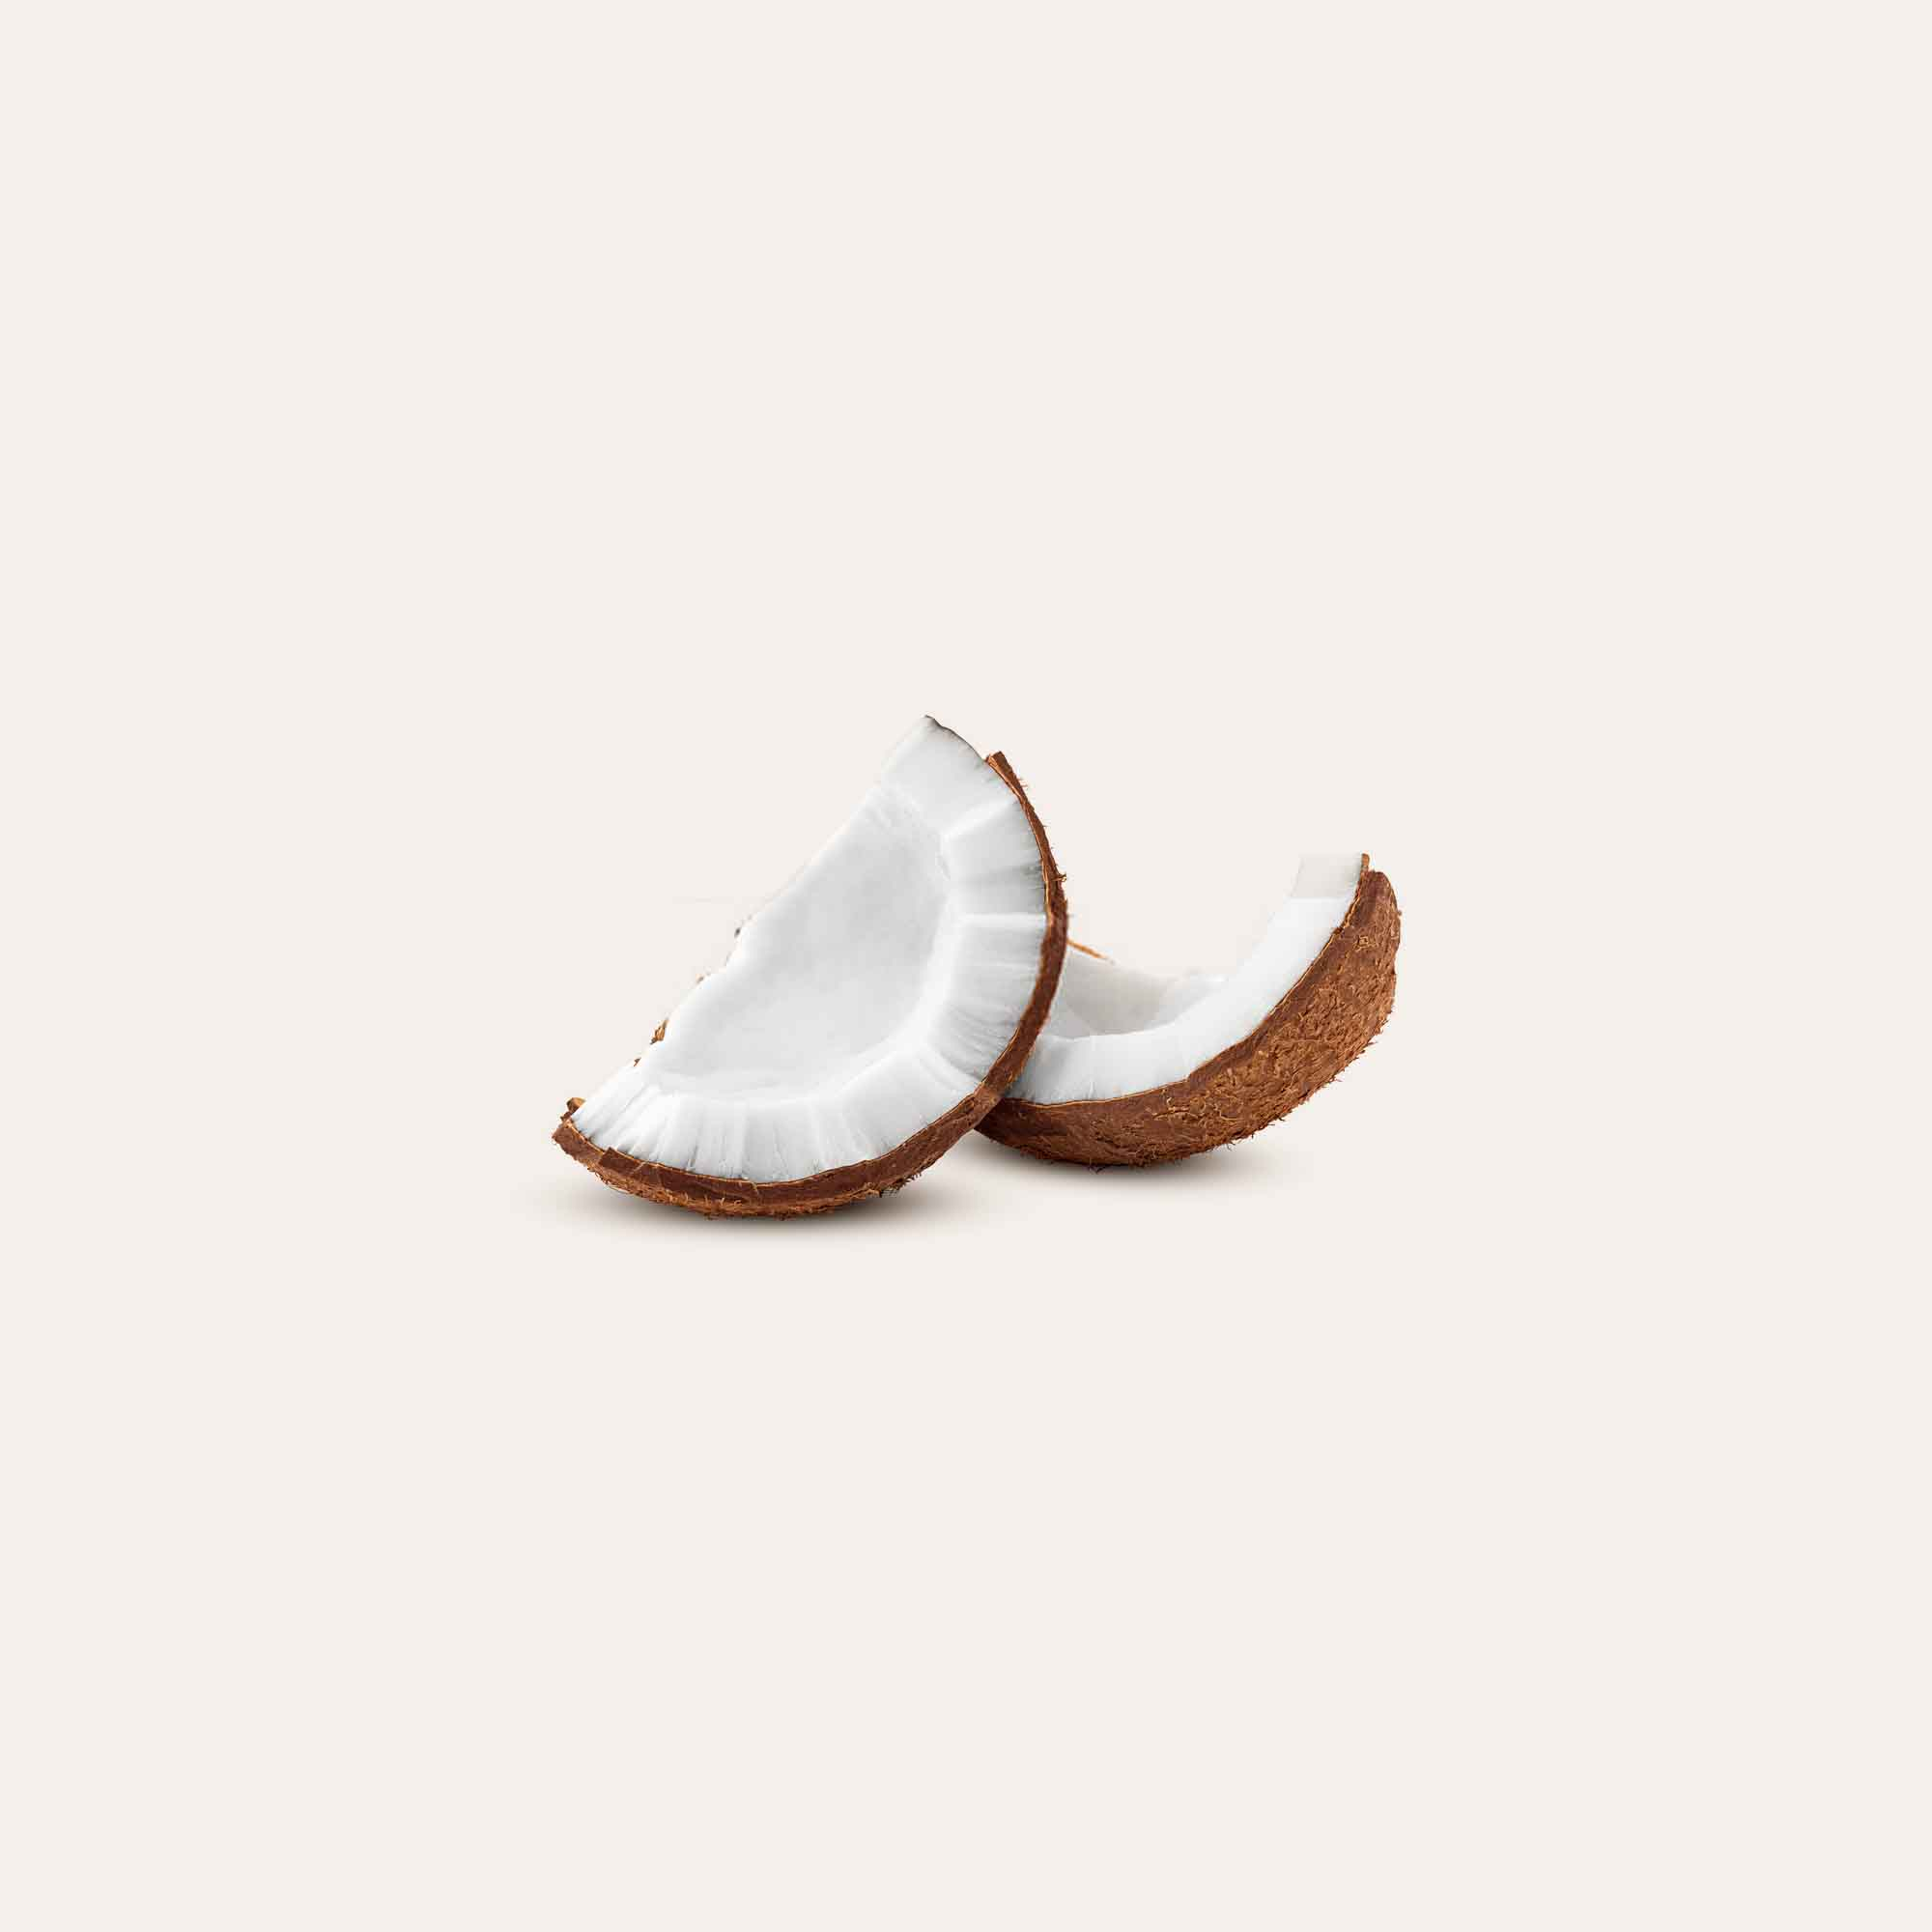 coconut wedges on solid background